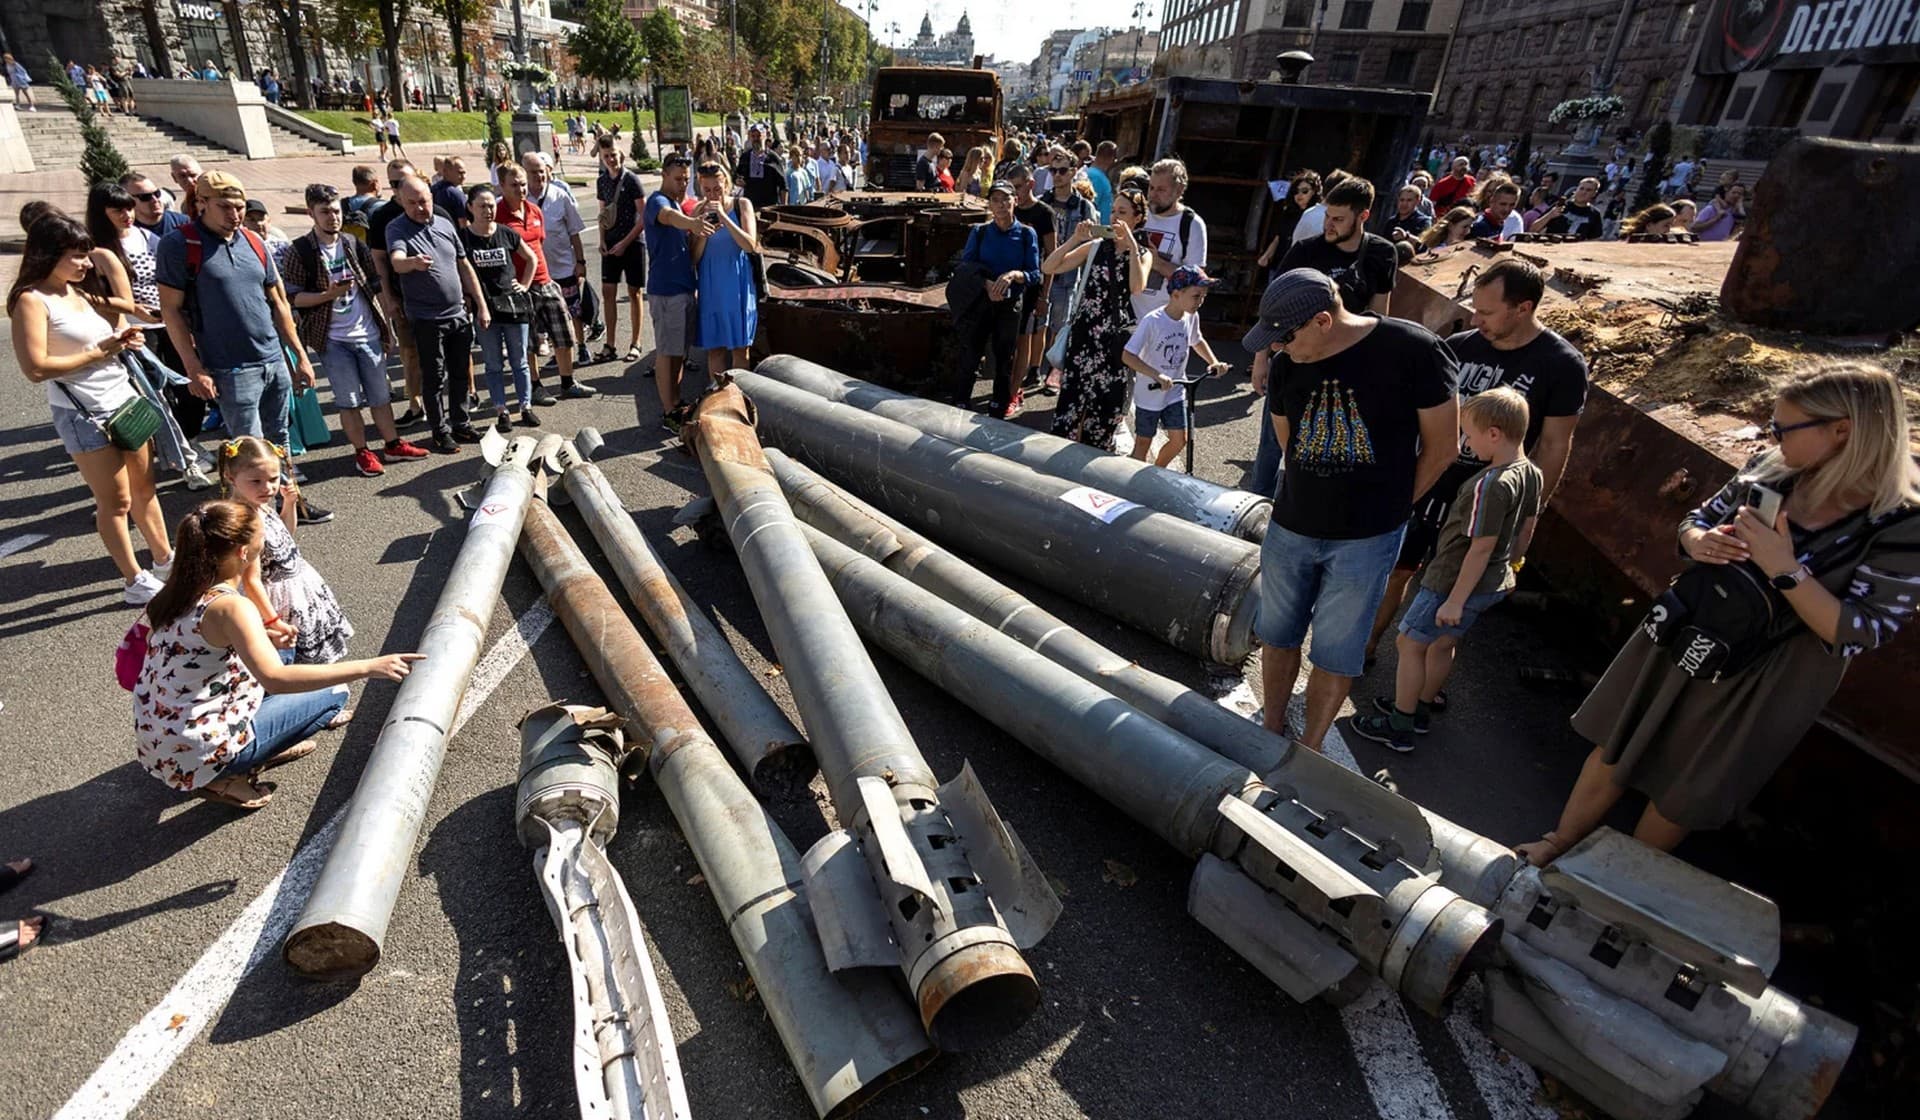 People visit an exhibition of destroyed Russian military vehicles and weapons in Kyiv